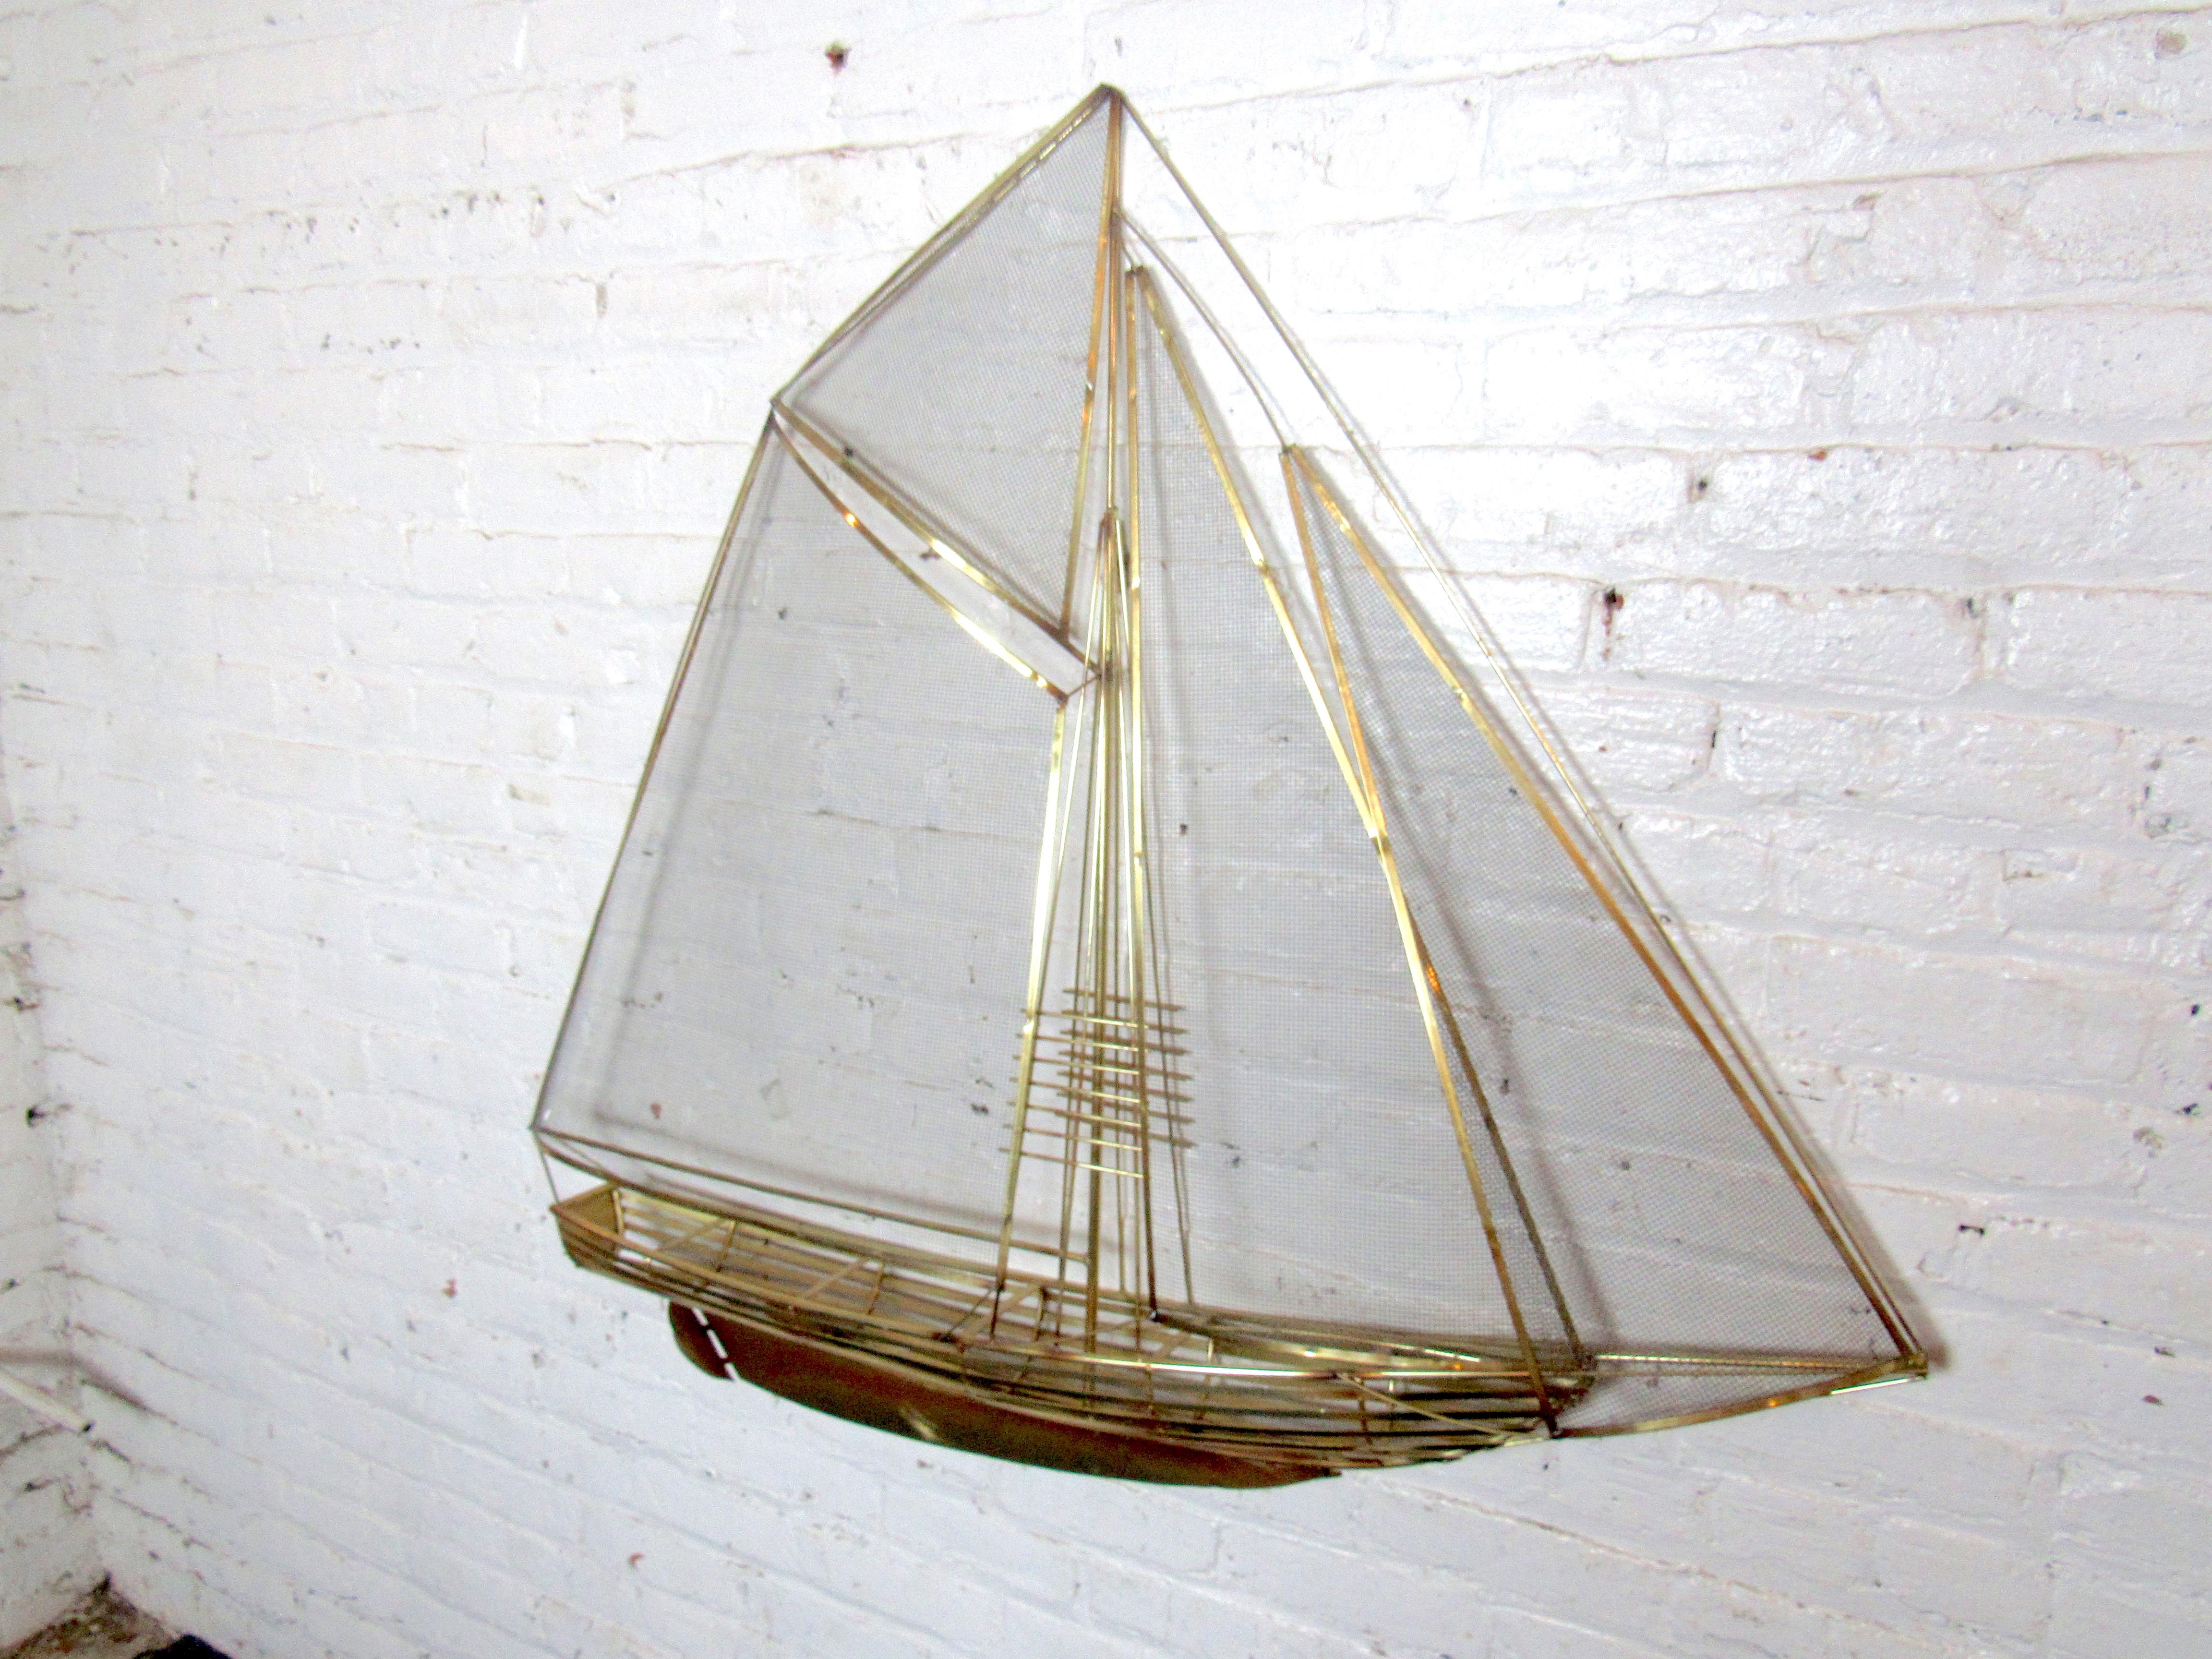 Intricately crafted in brass, this large wall-mounted sailboat sculpture is styled after the art of C. Jere. Please confirm item location with seller (NY/NJ).